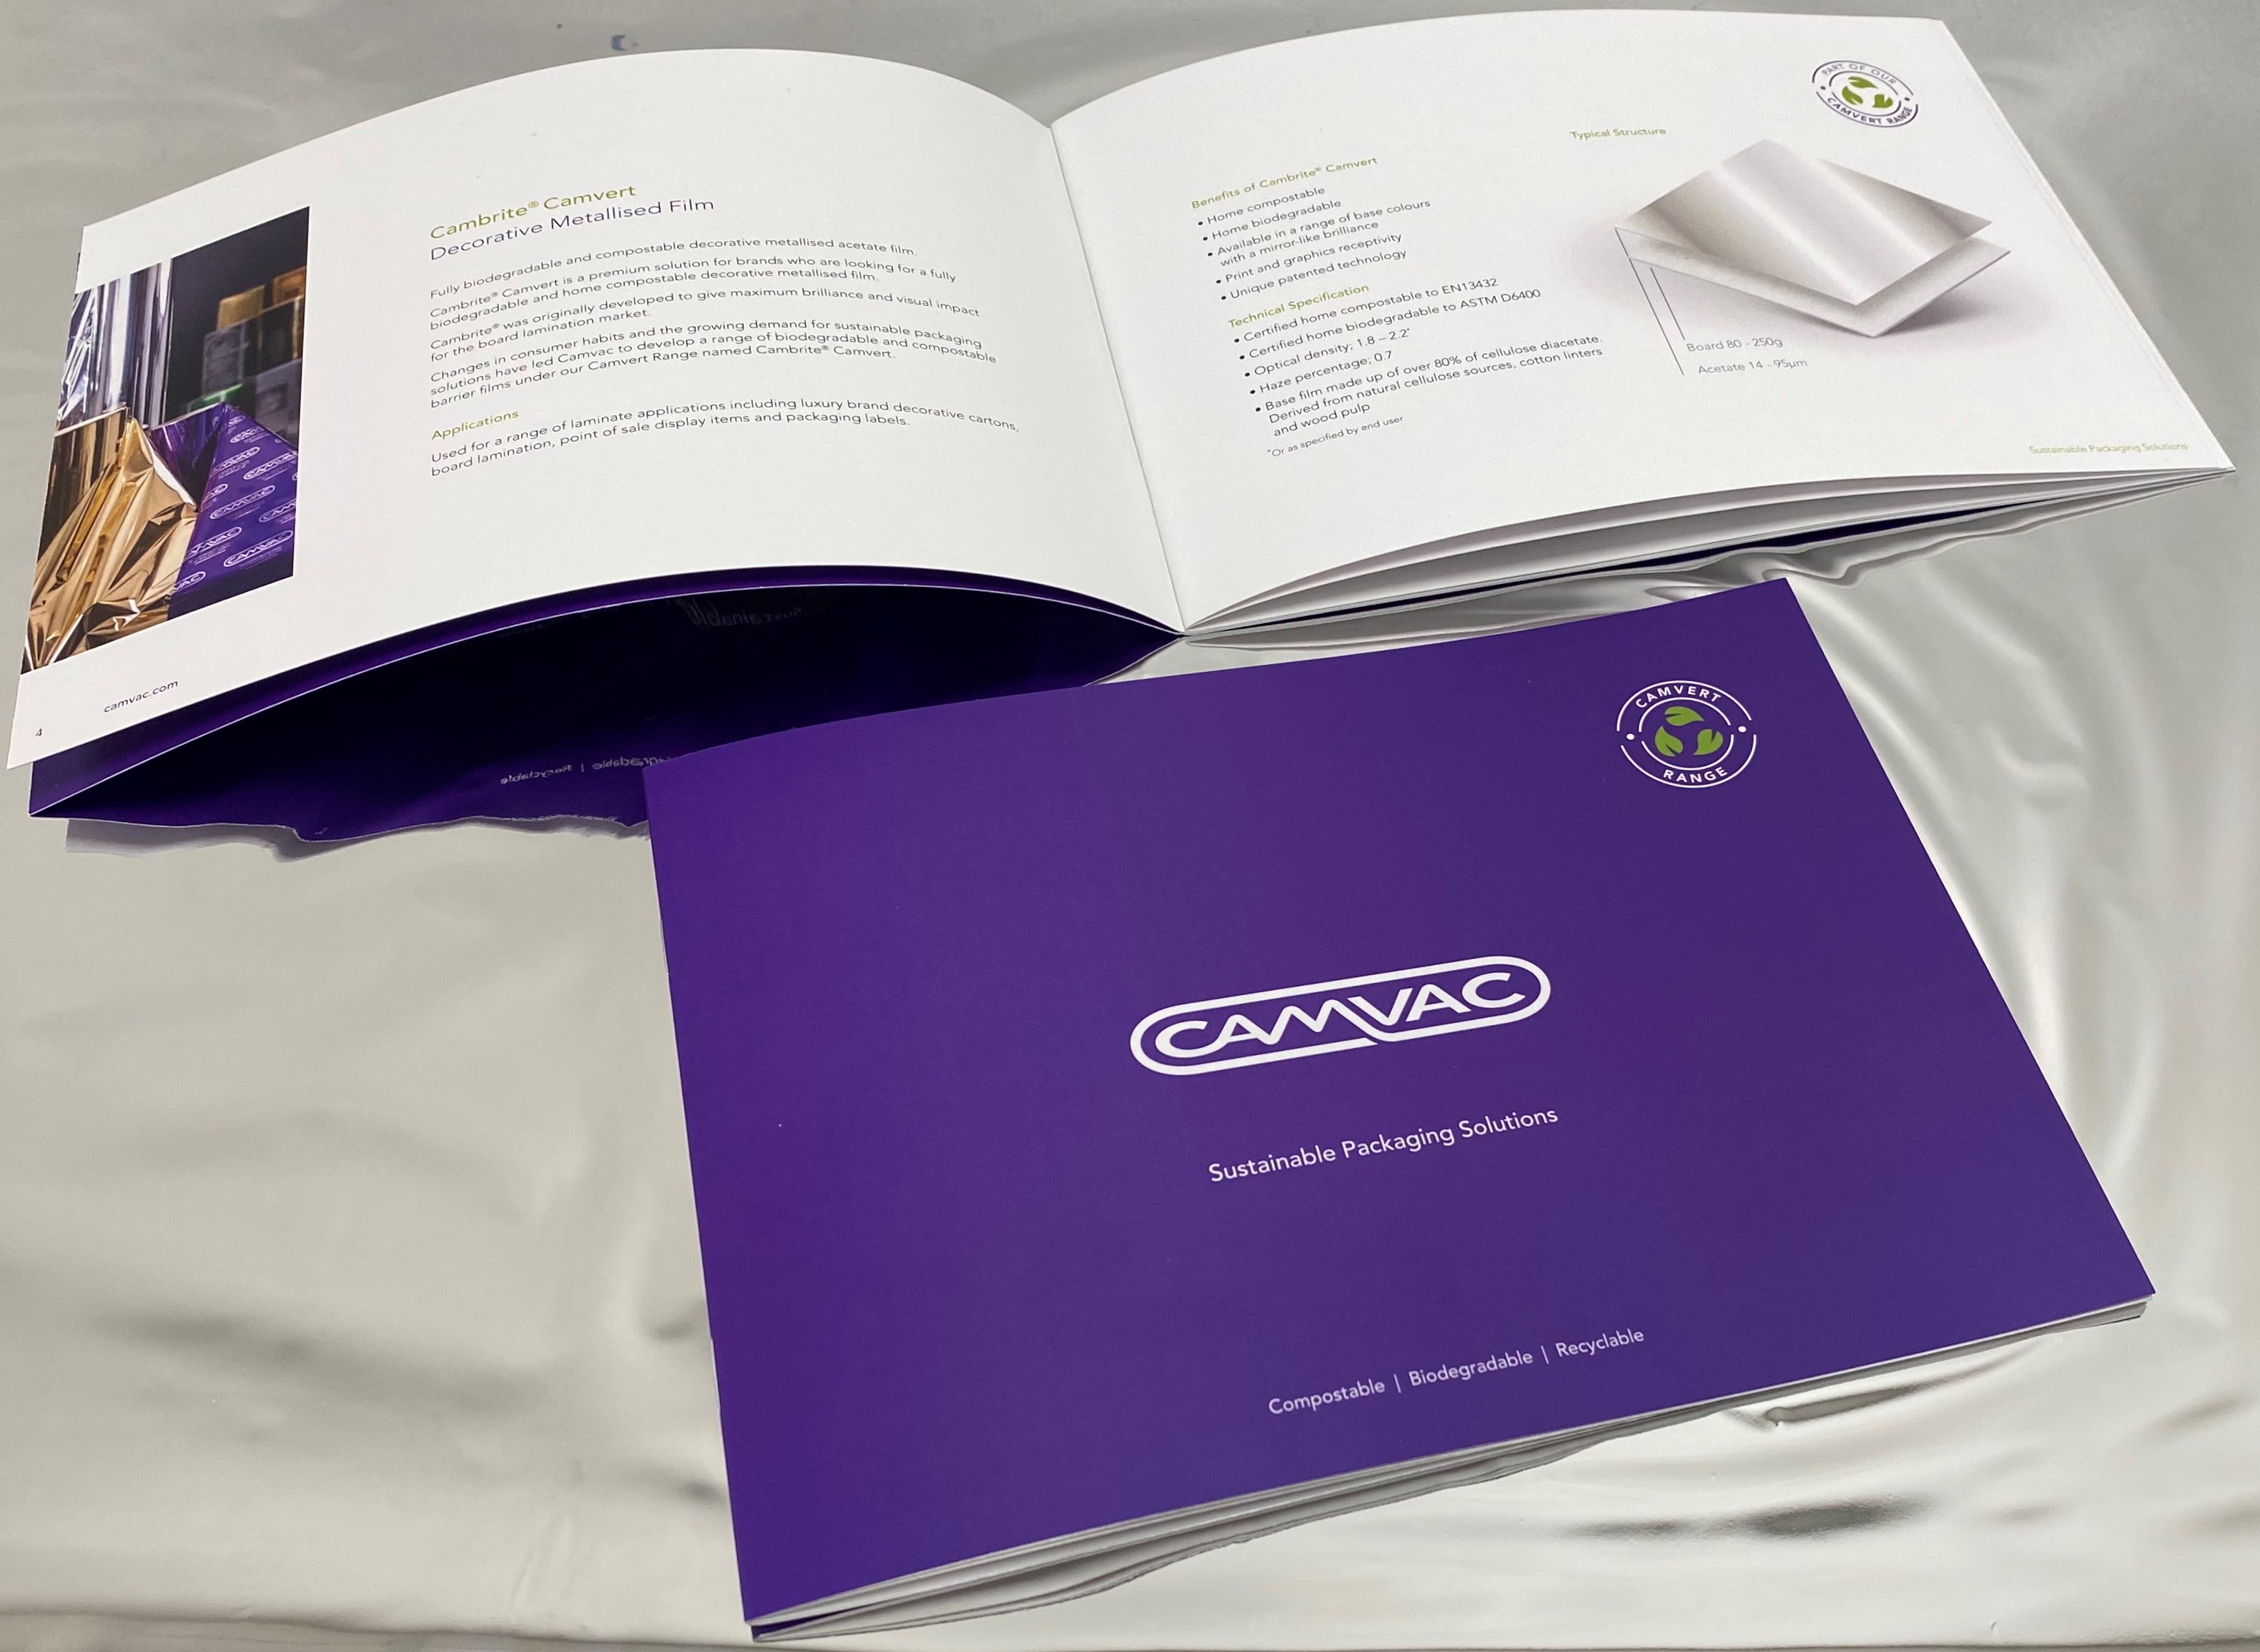 Sustainable Packaging Solutions Brochure from Camvac